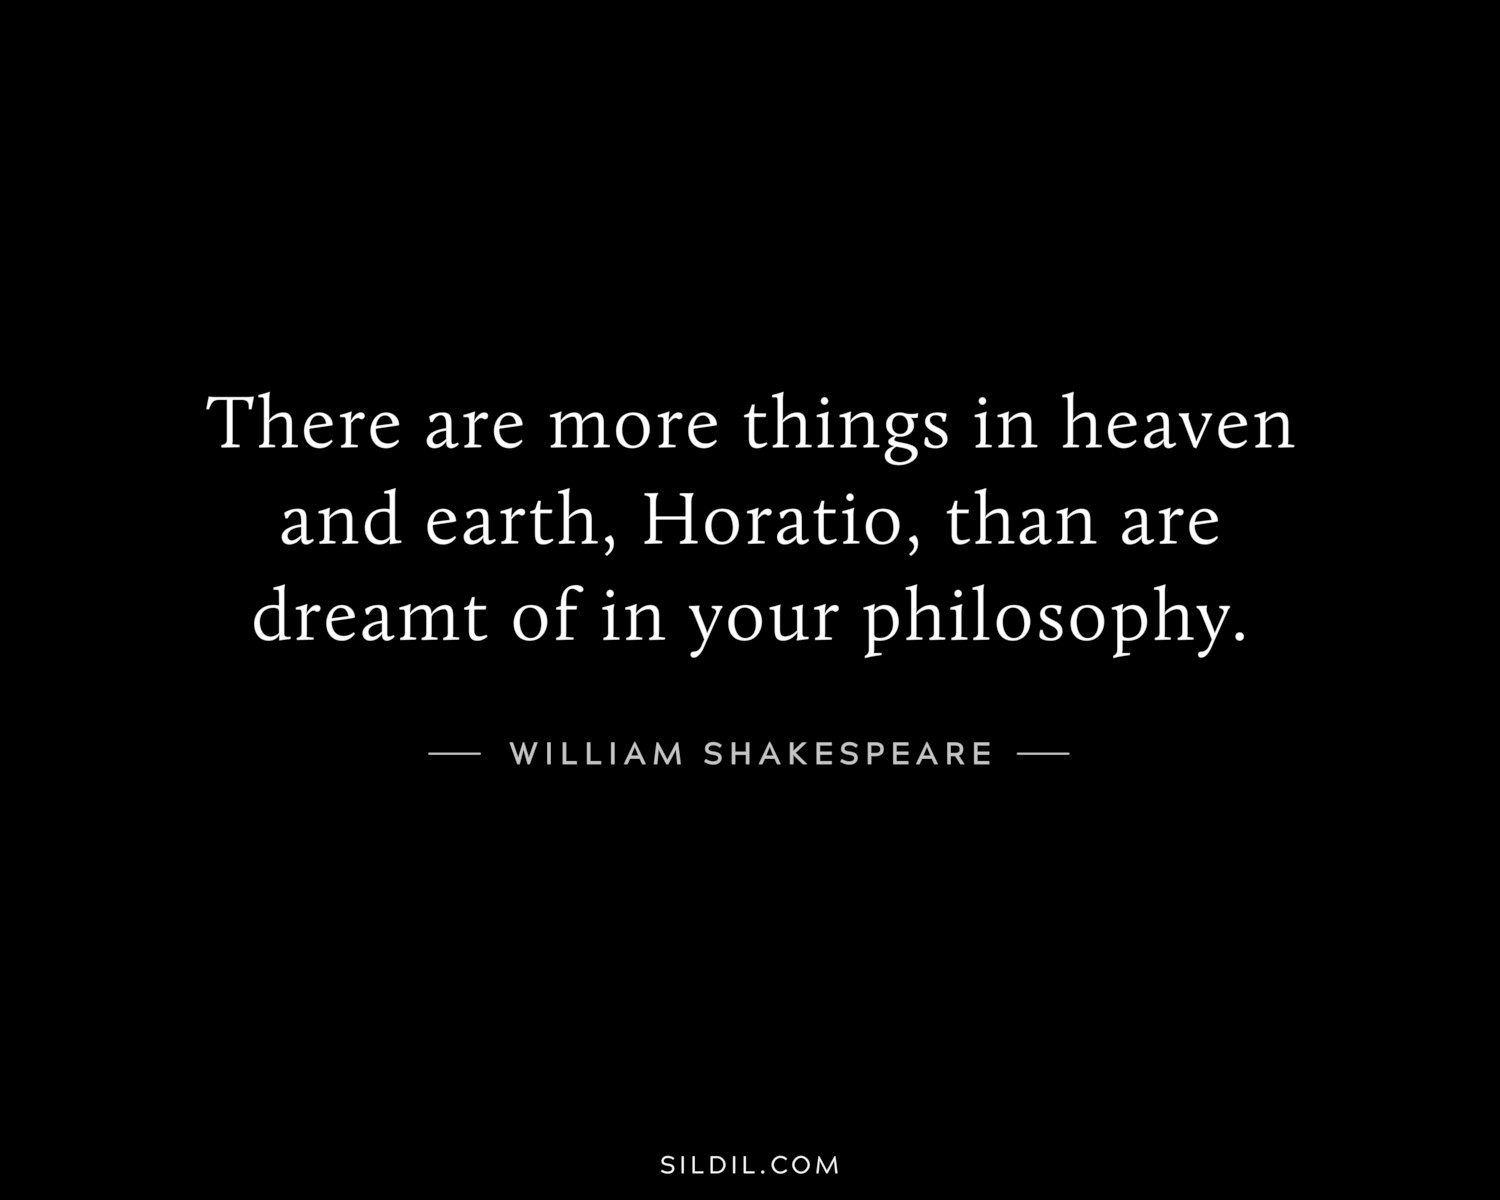 There are more things in heaven and earth, Horatio, than are dreamt of in your philosophy.